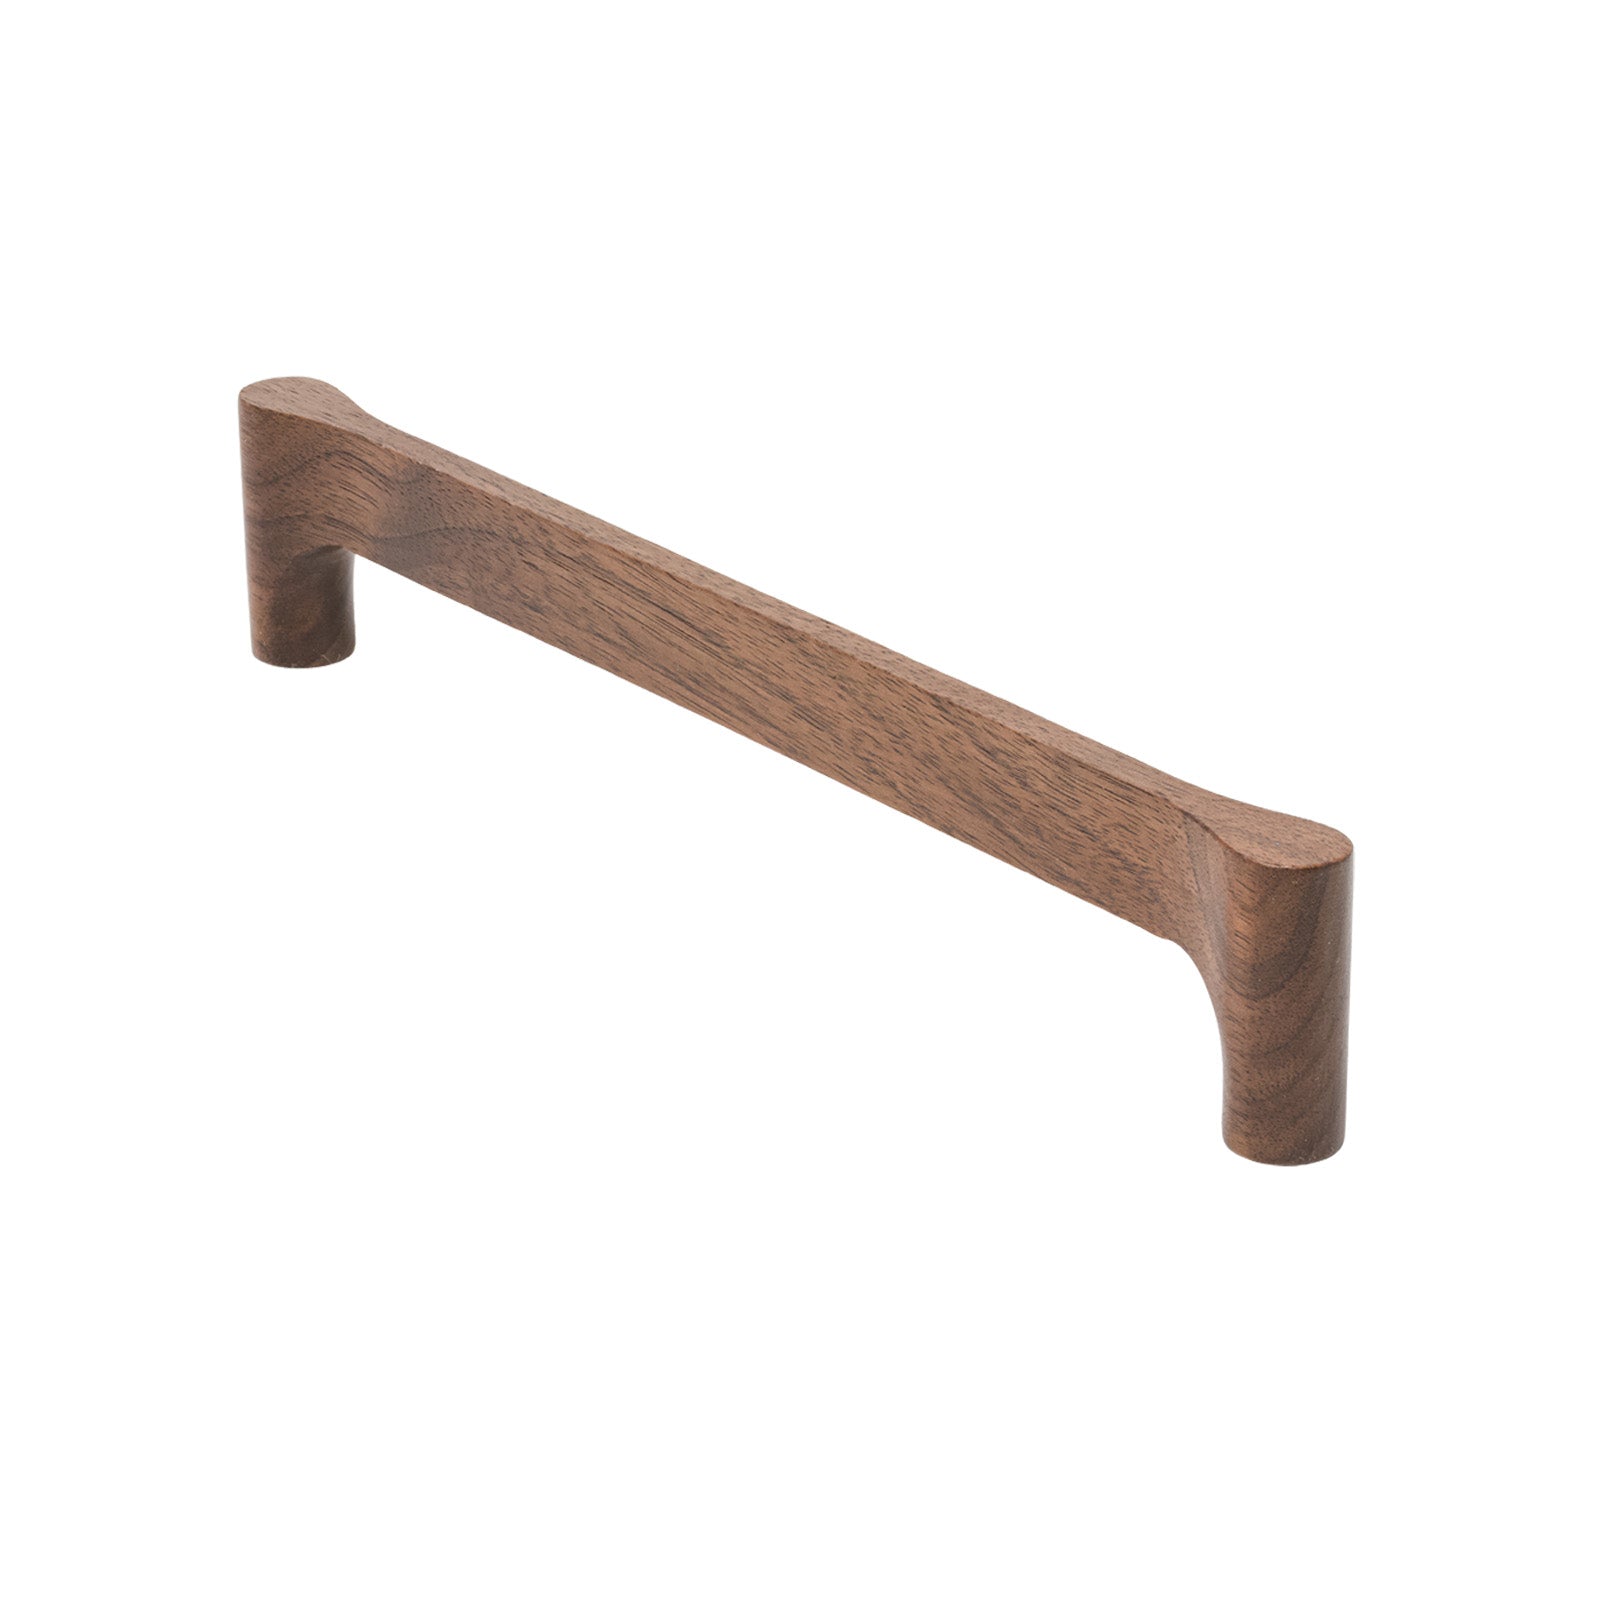 SHOW 224mm Gio Cabinet Pull Handle In Walnut Finish